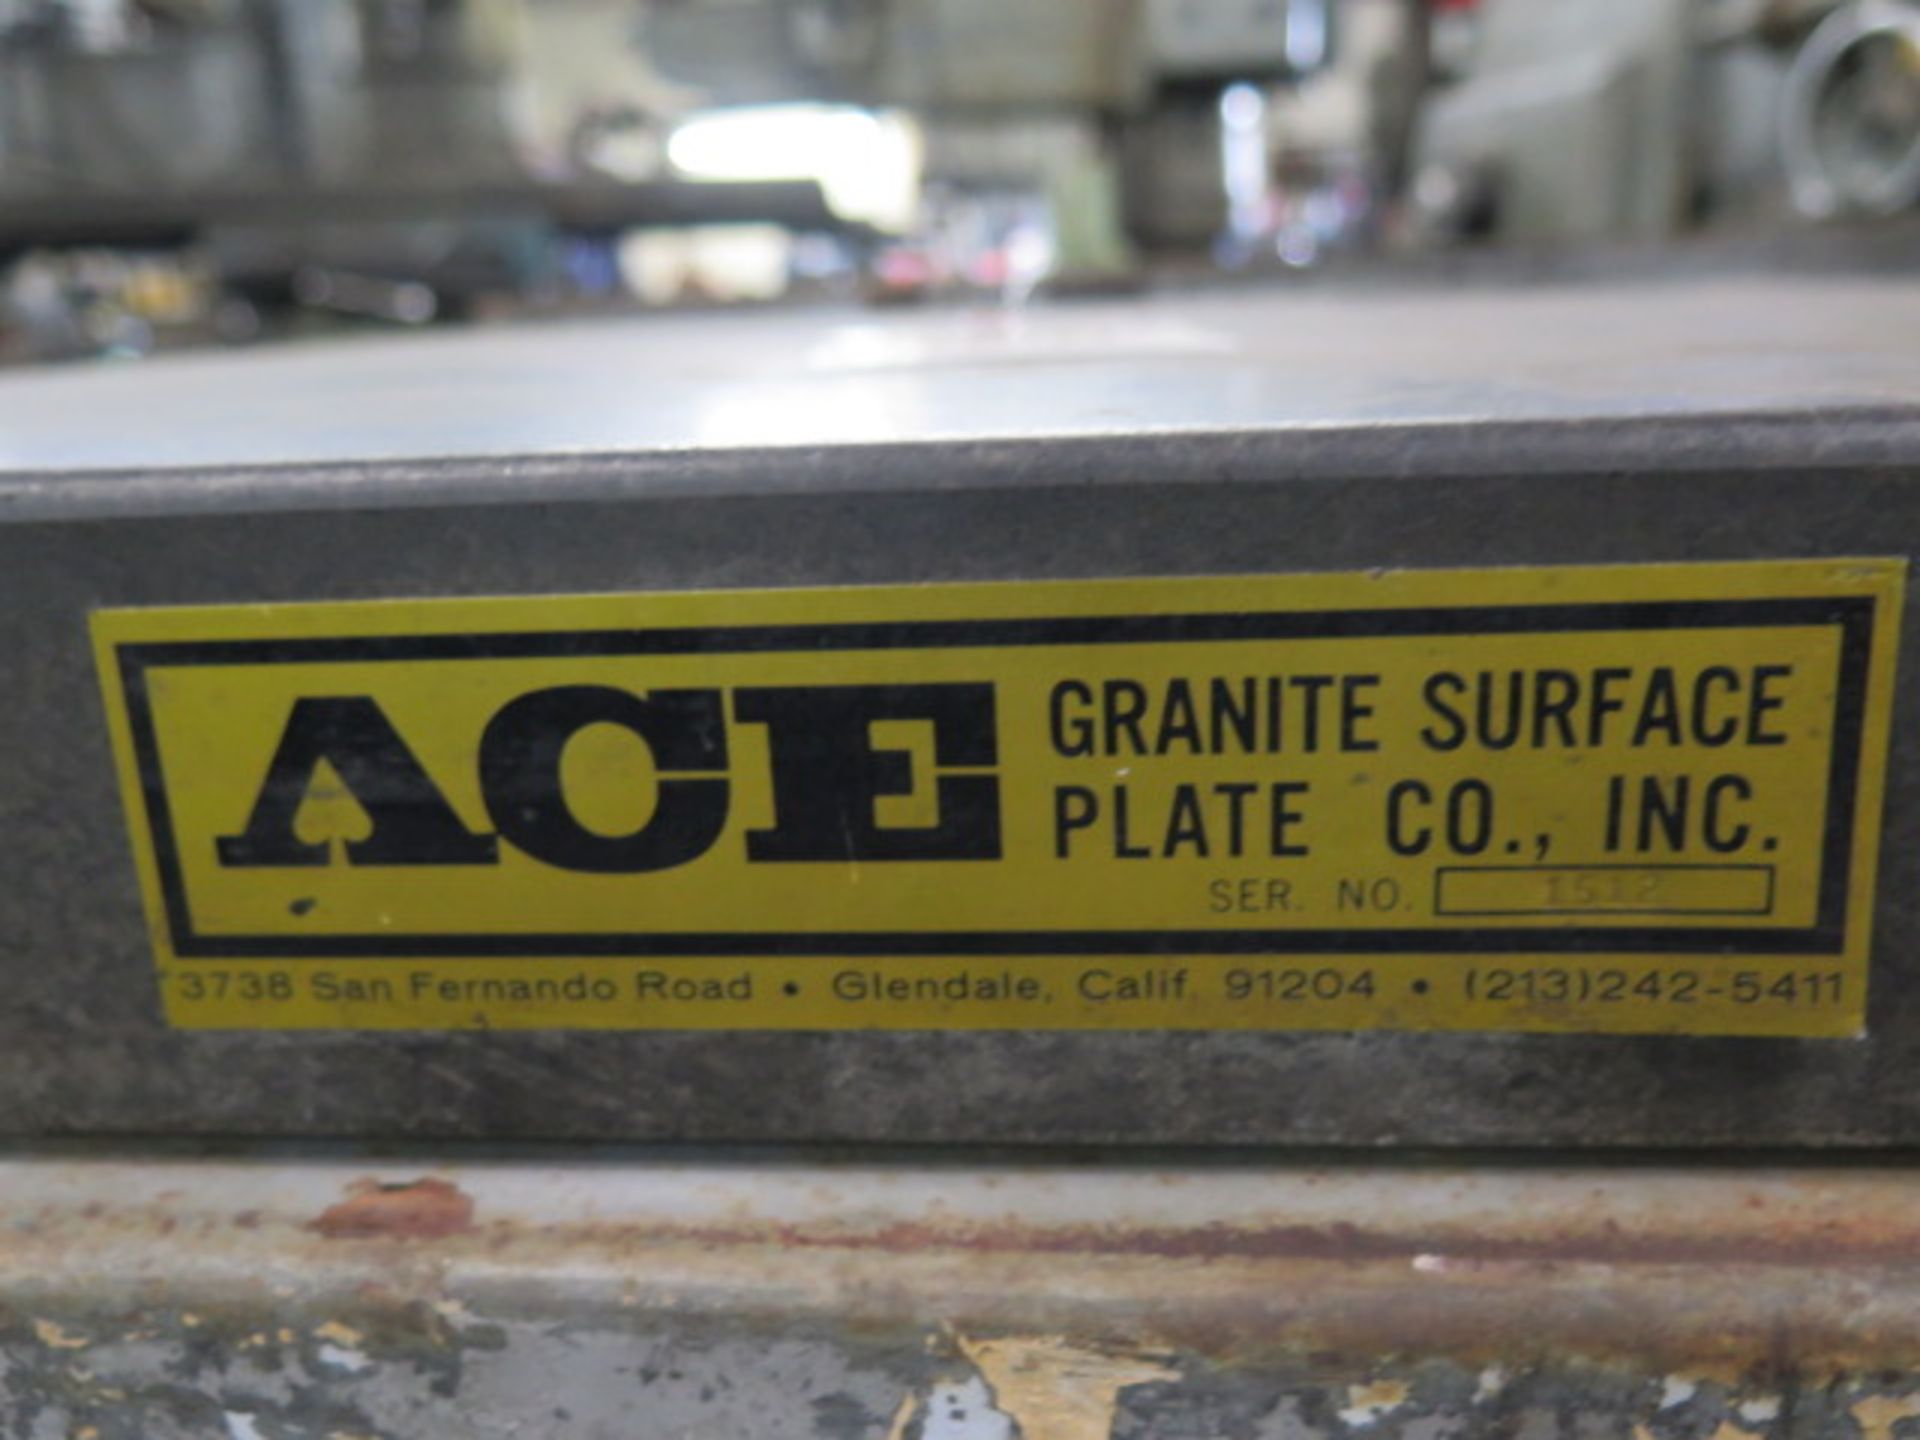 24" x 24" x 3" Granite Surface Plate (SOLD AS-IS - NO WARRANTY) - Image 4 of 4